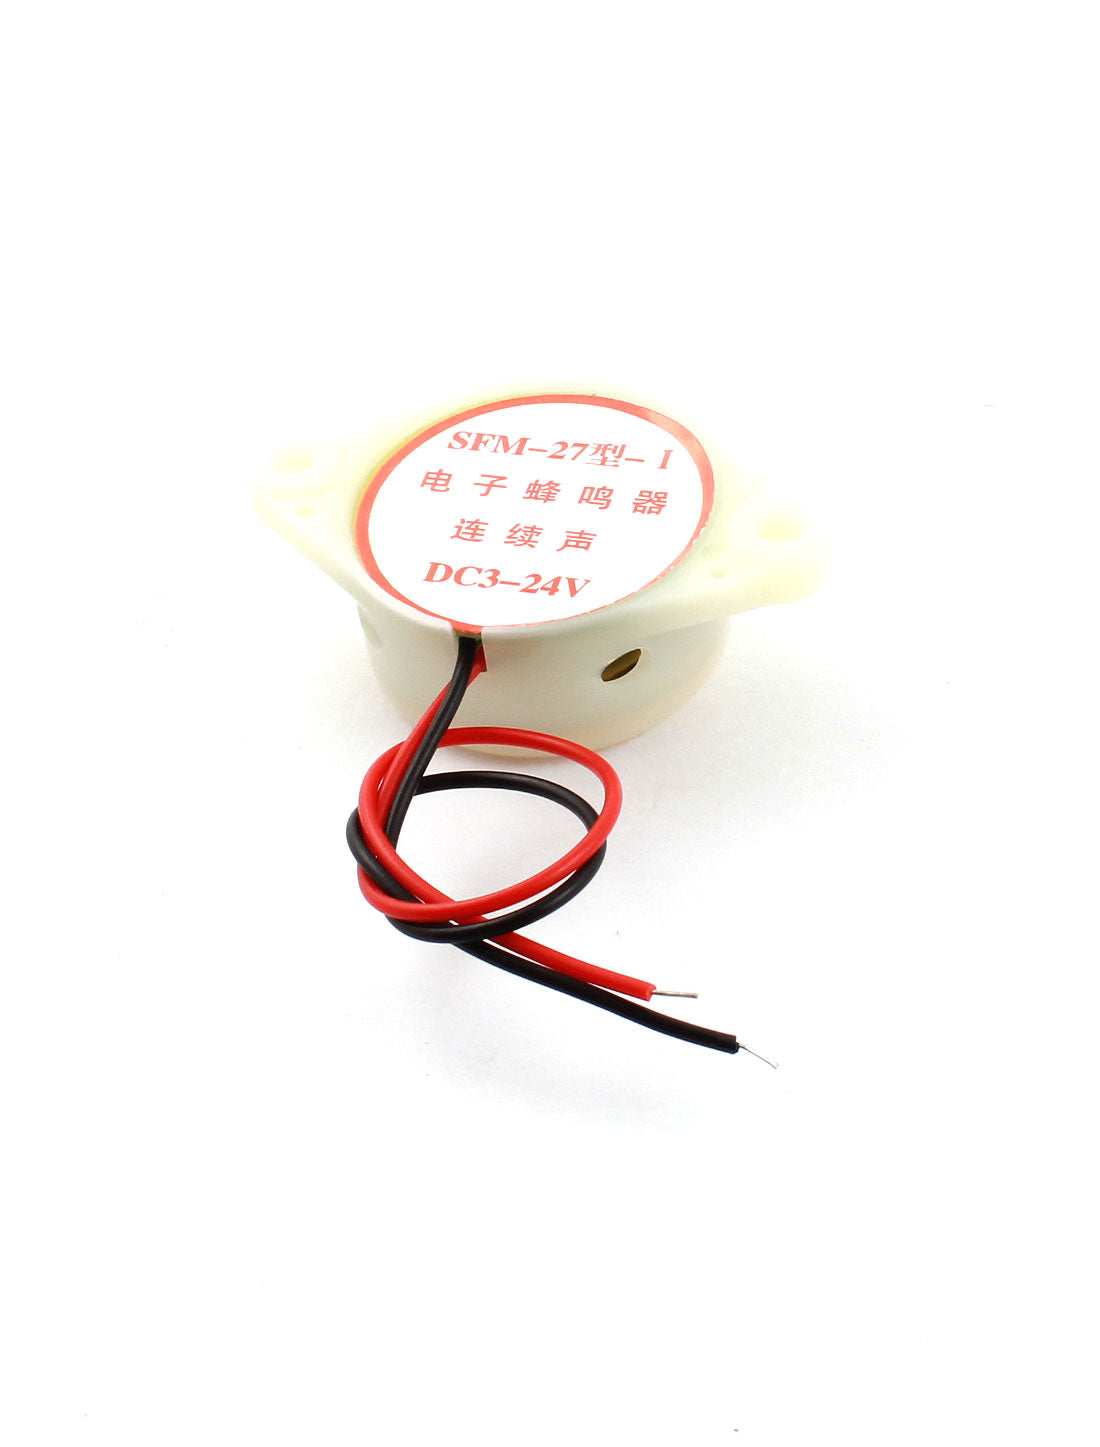 uxcell Uxcell SFM-27-I DC 3-24V 30mA Industrial Continuous Sound Electronic Buzzer 80dB